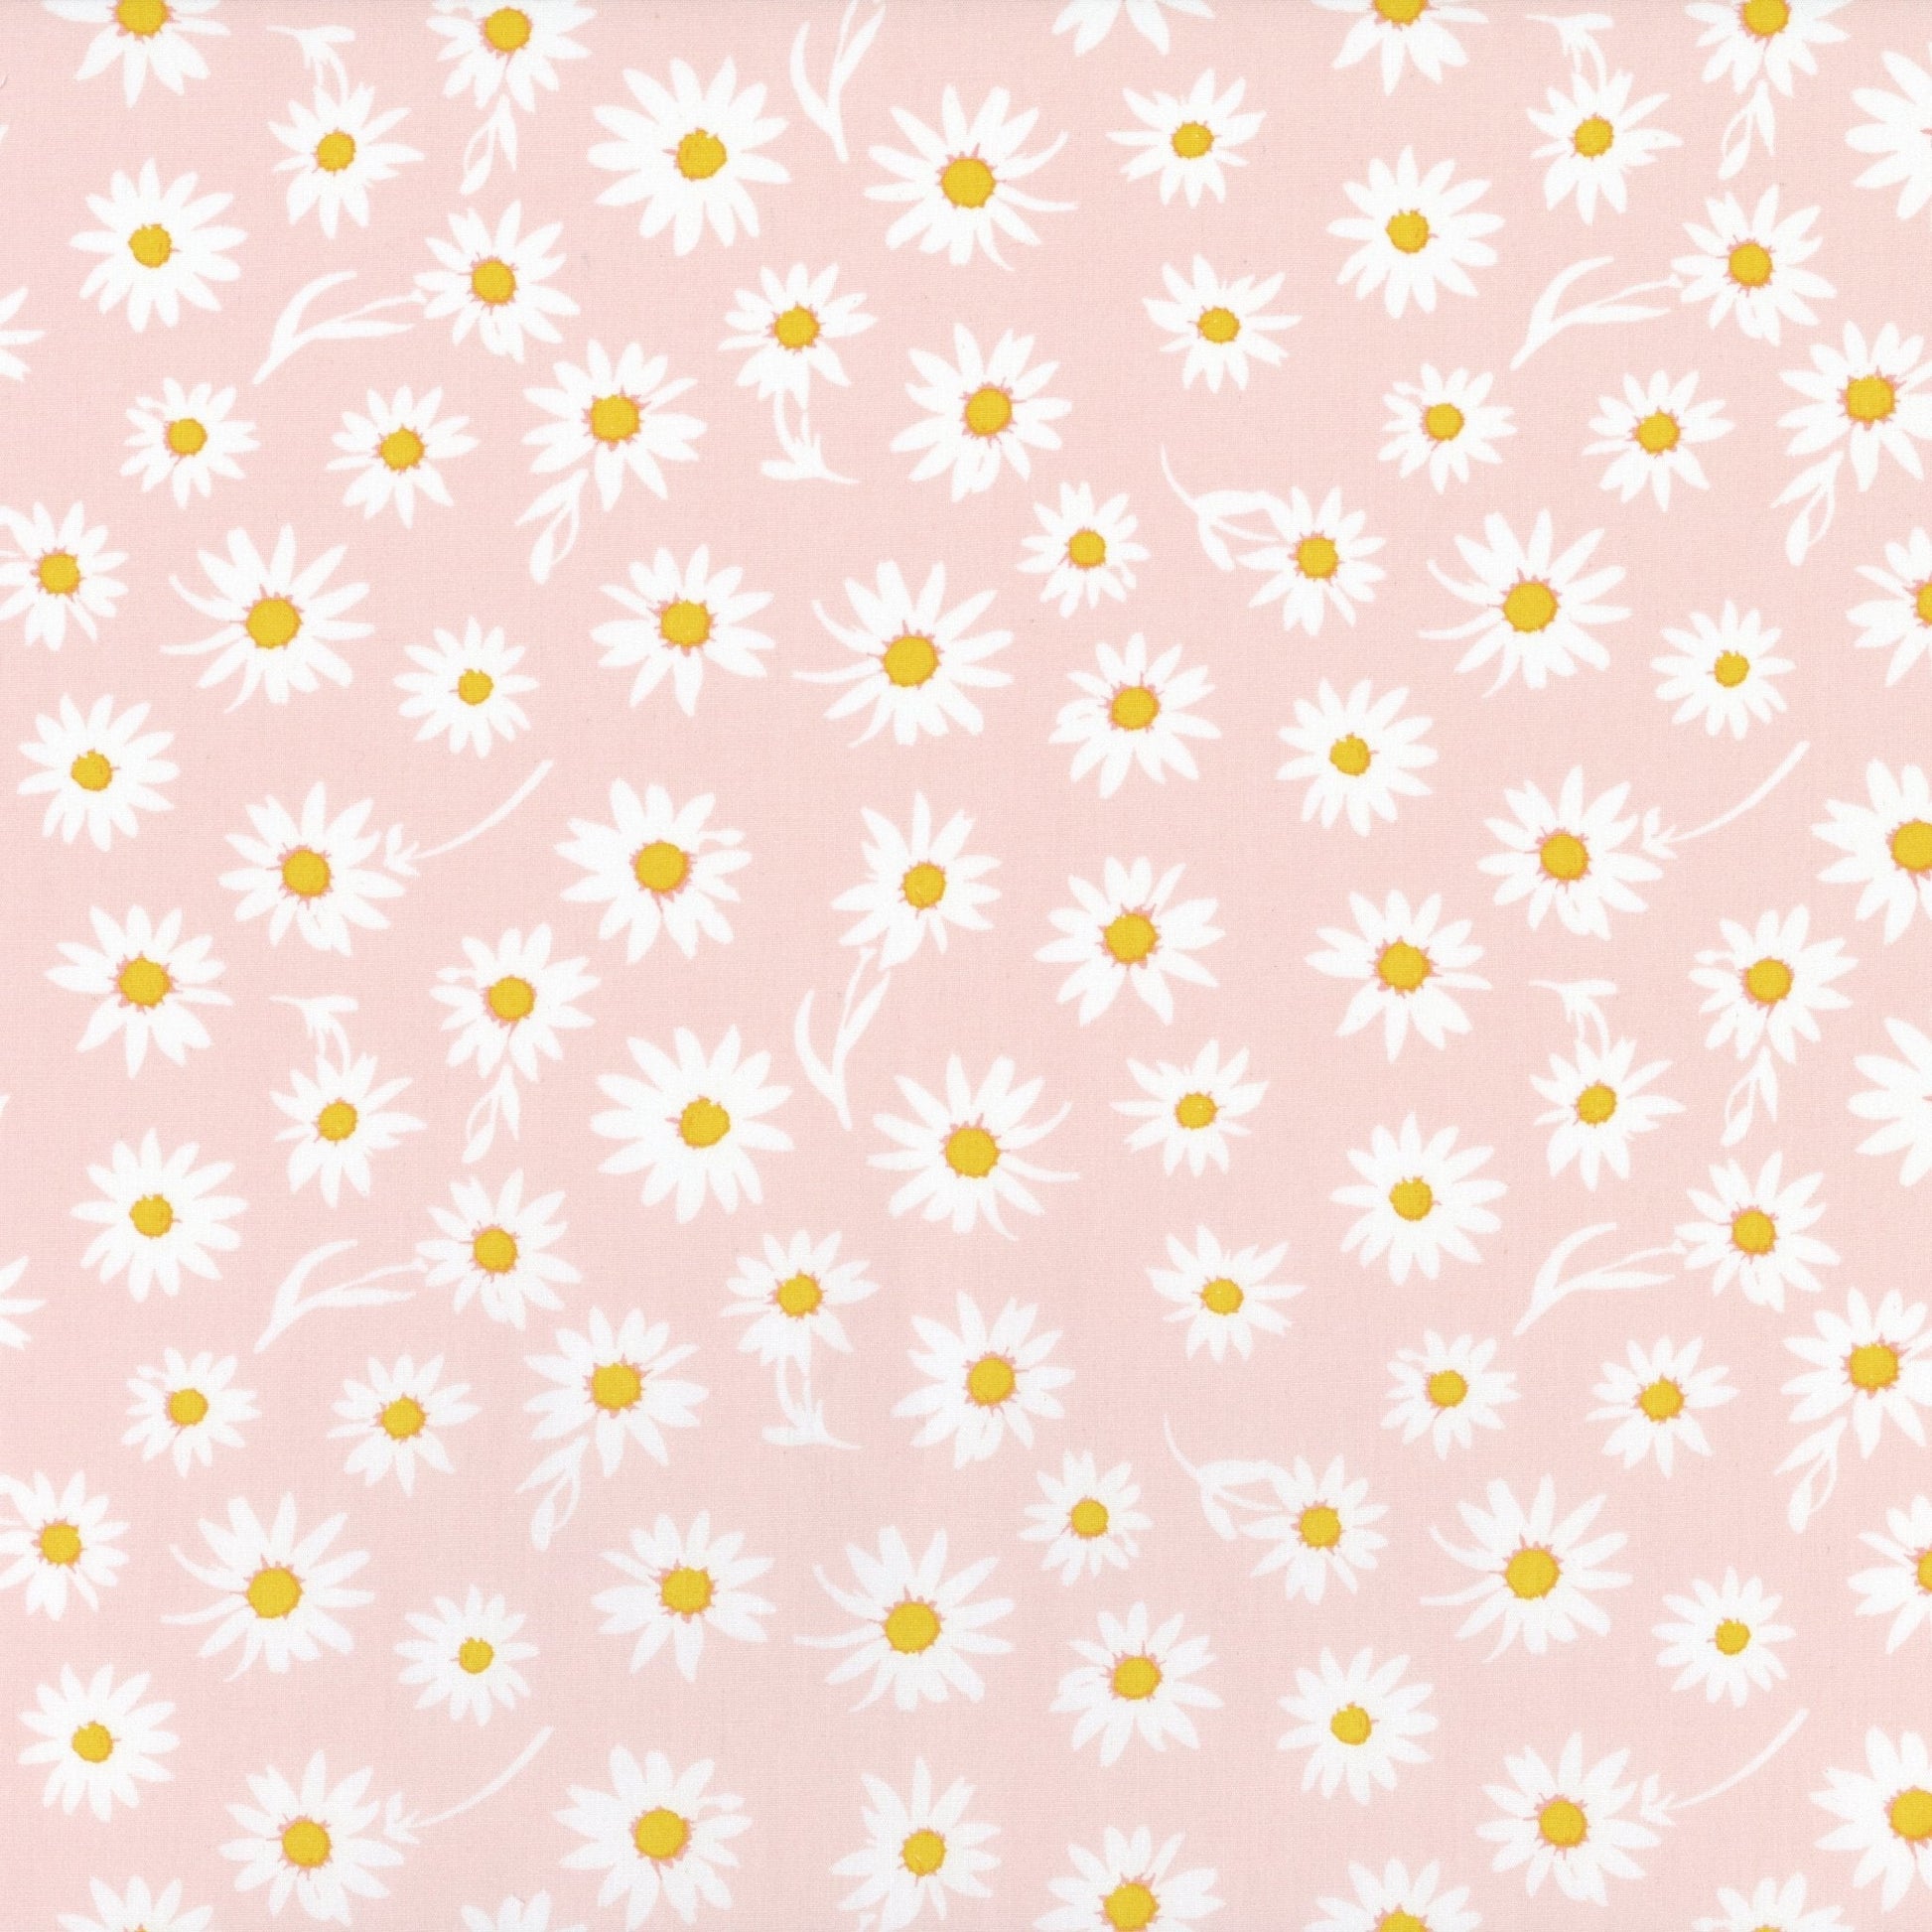 Morning Glory Flower Swatch - New Arrivals Inc